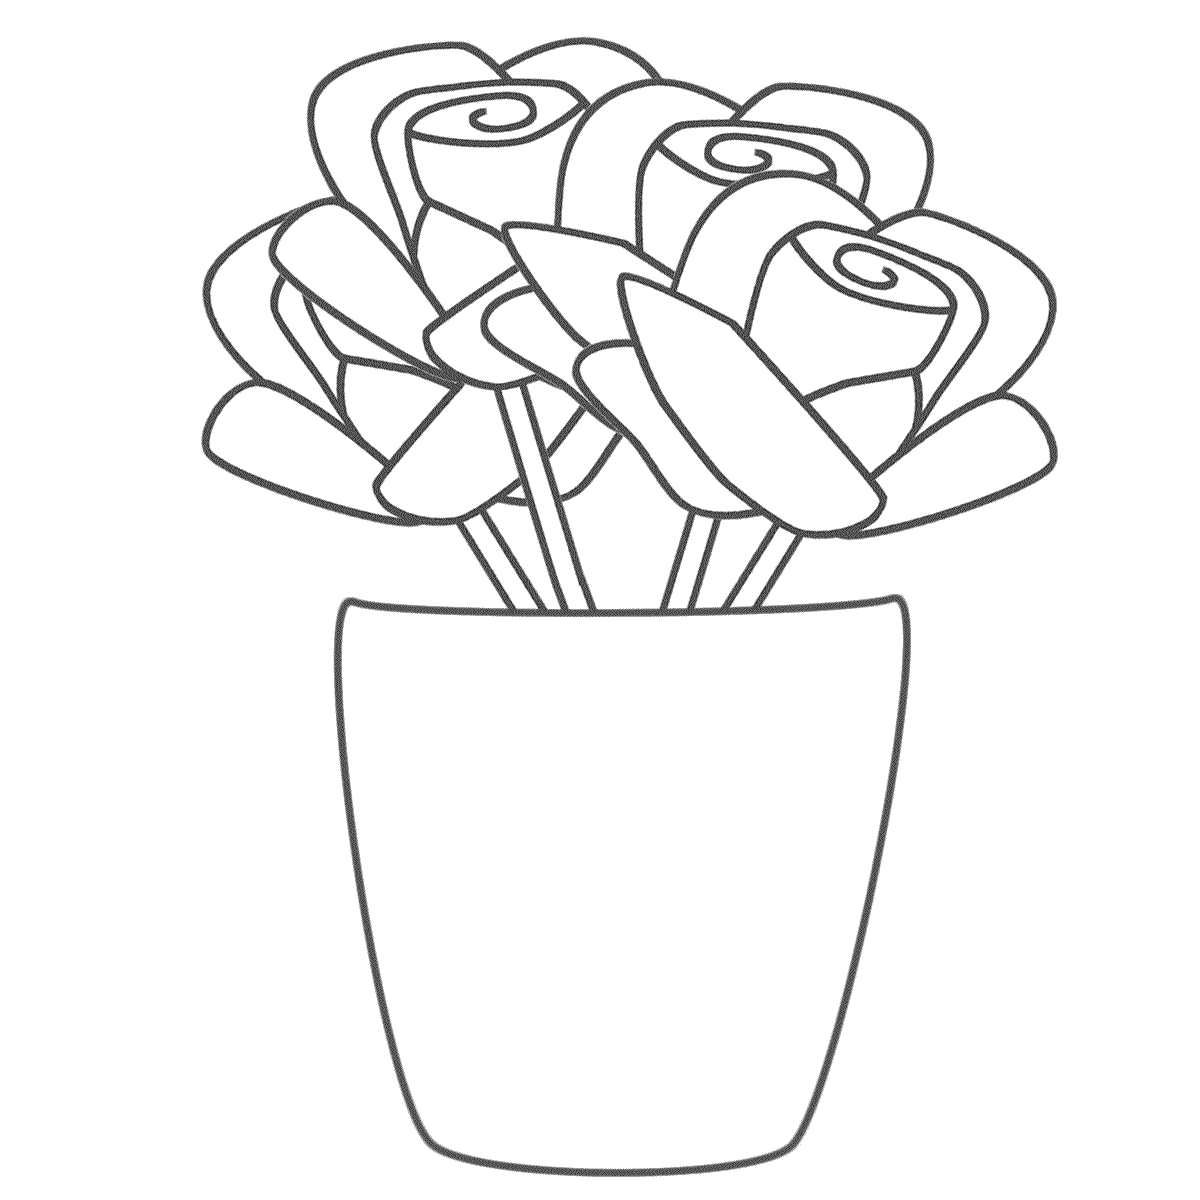 Flower Vase Coloring Page - Coloring Page